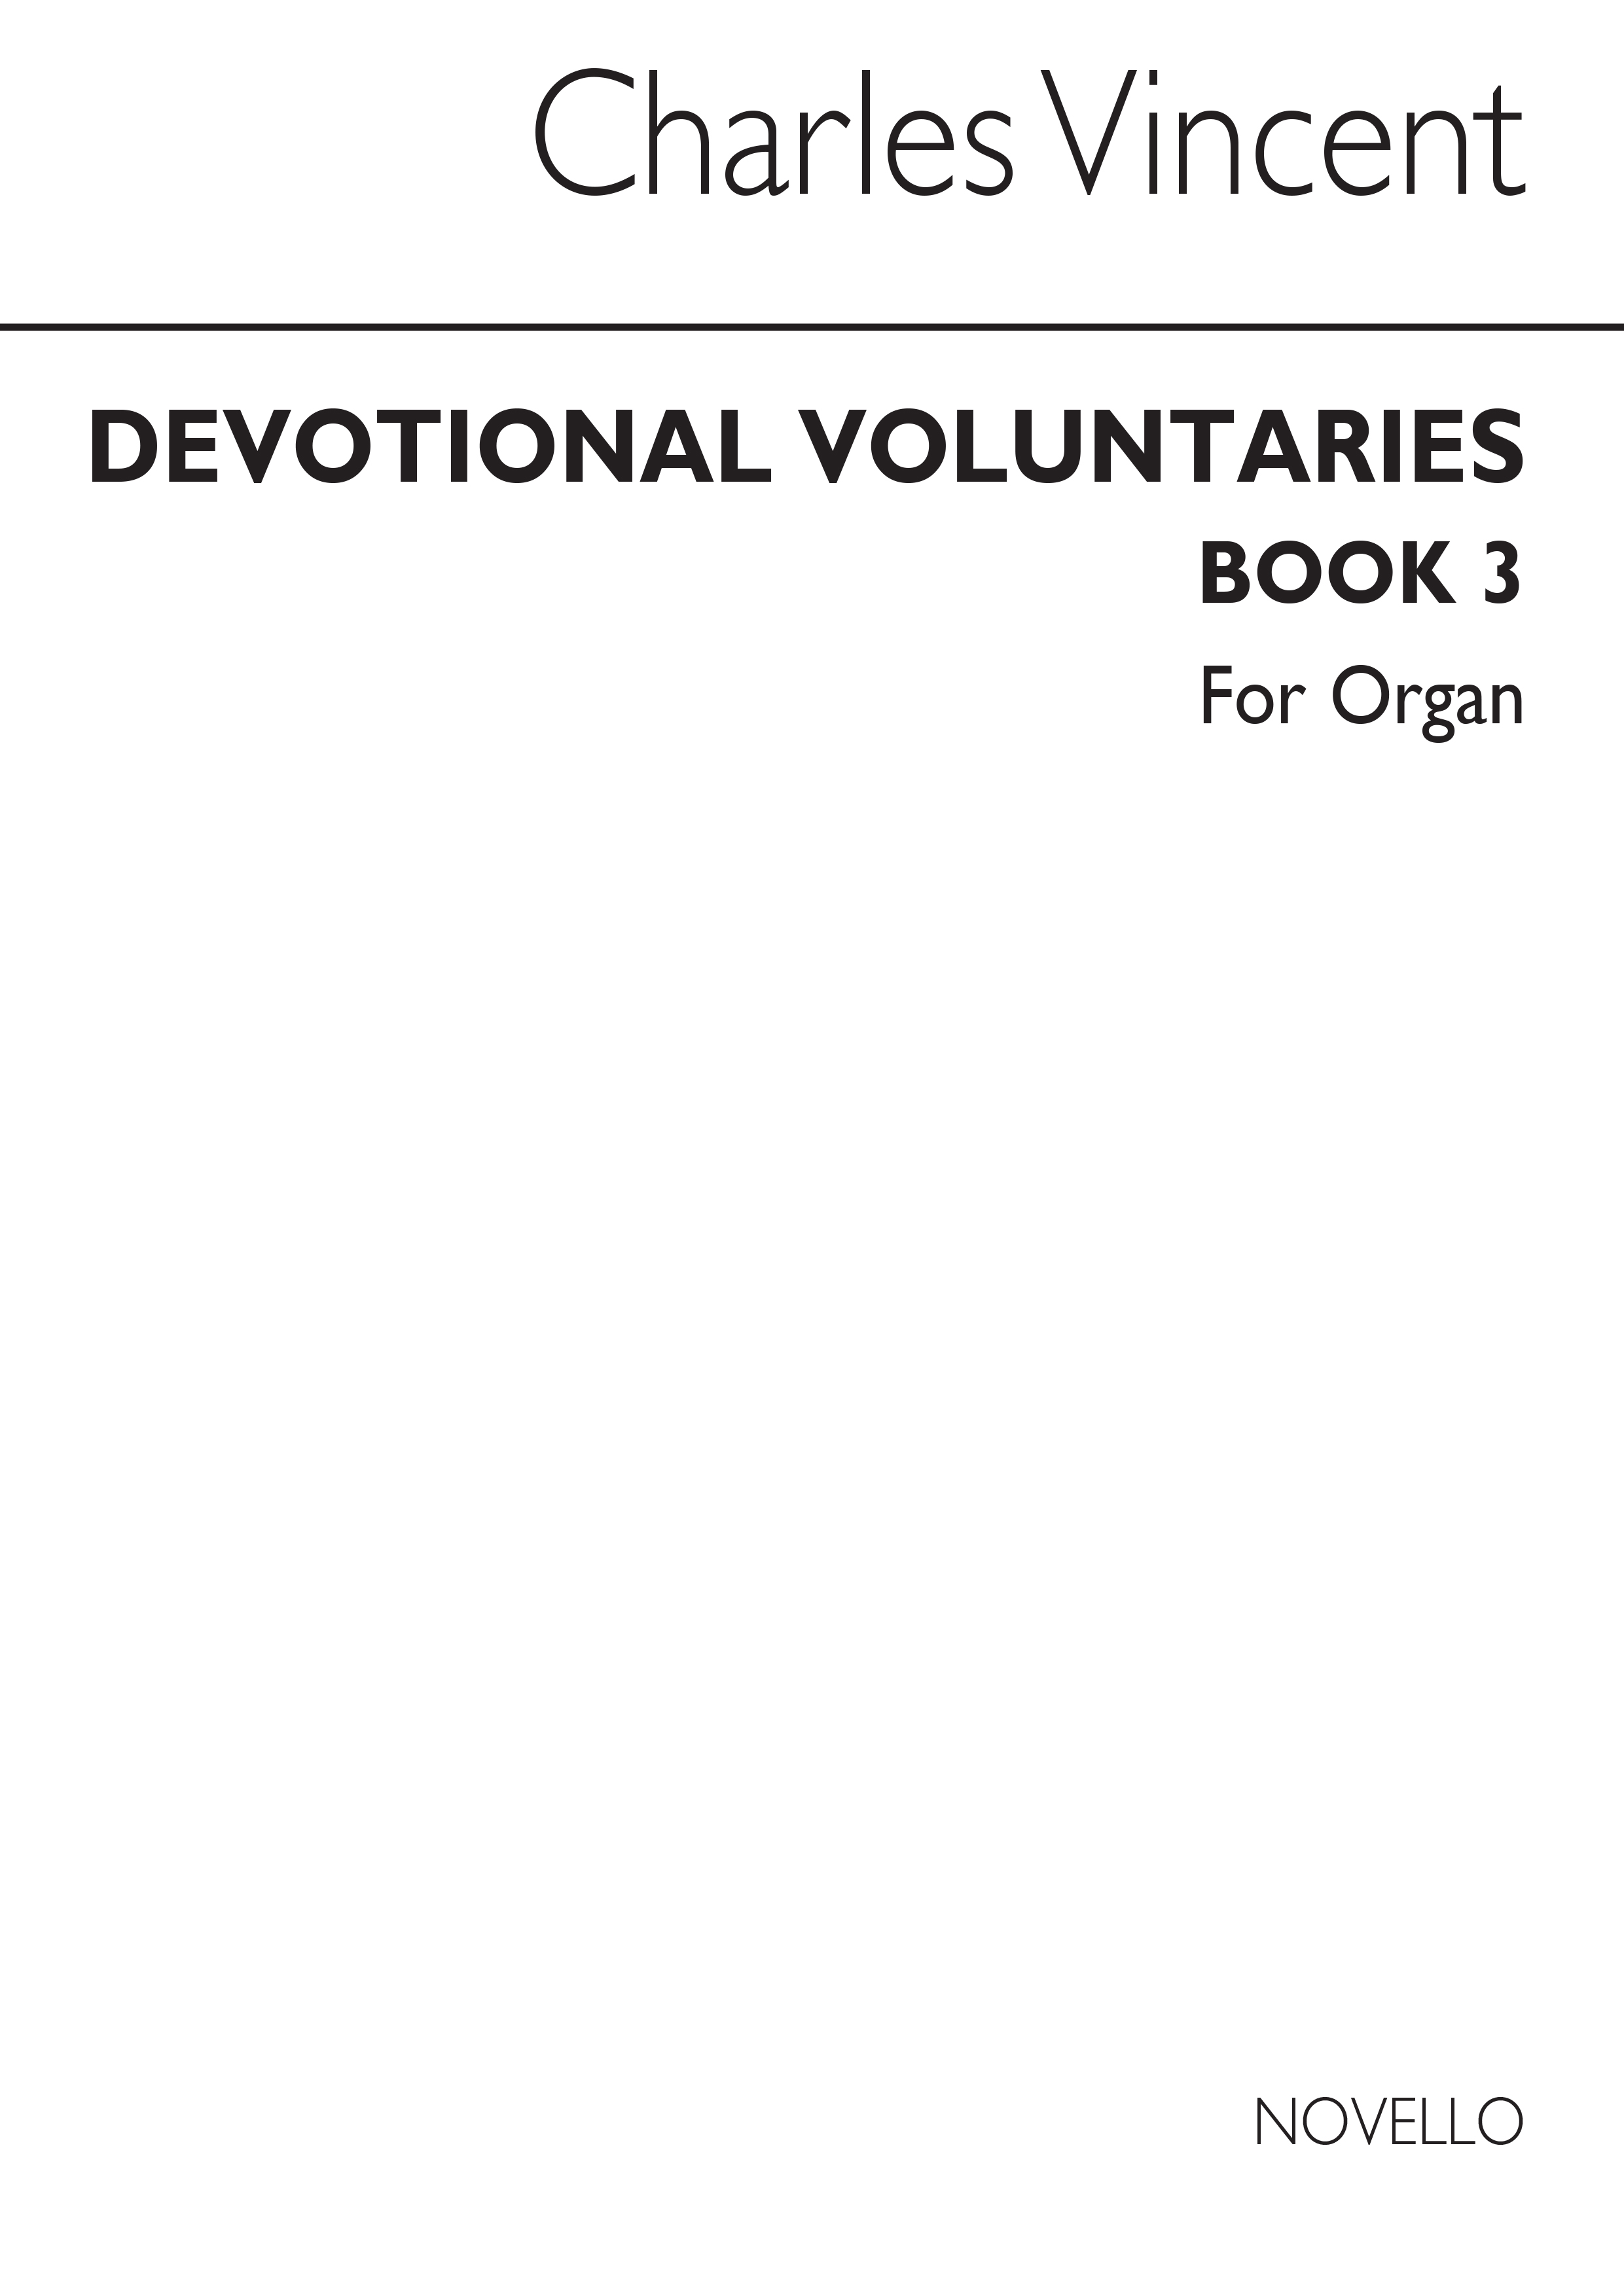 Vincent, C Devotional Voluntaries Book 3 For Organ (Two Stave)